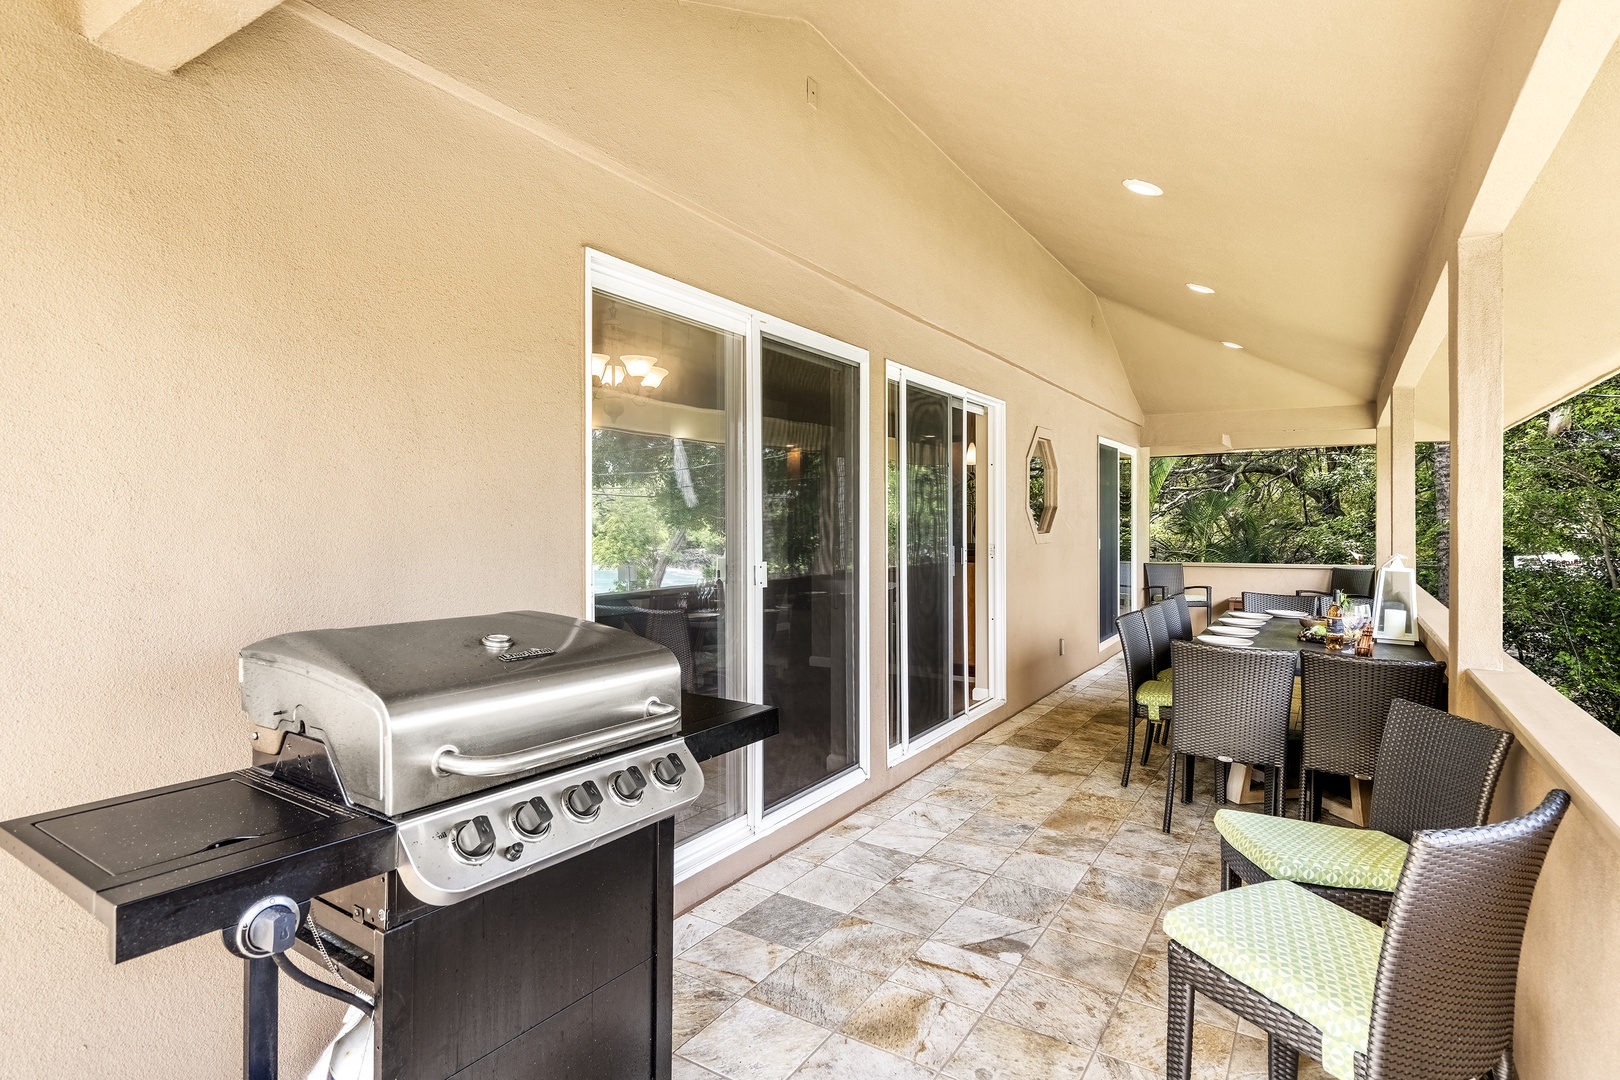 Kailua Kona Vacation Rentals, Lymans Bay Hale - BBQ on the Lanai steps from the kitchen!